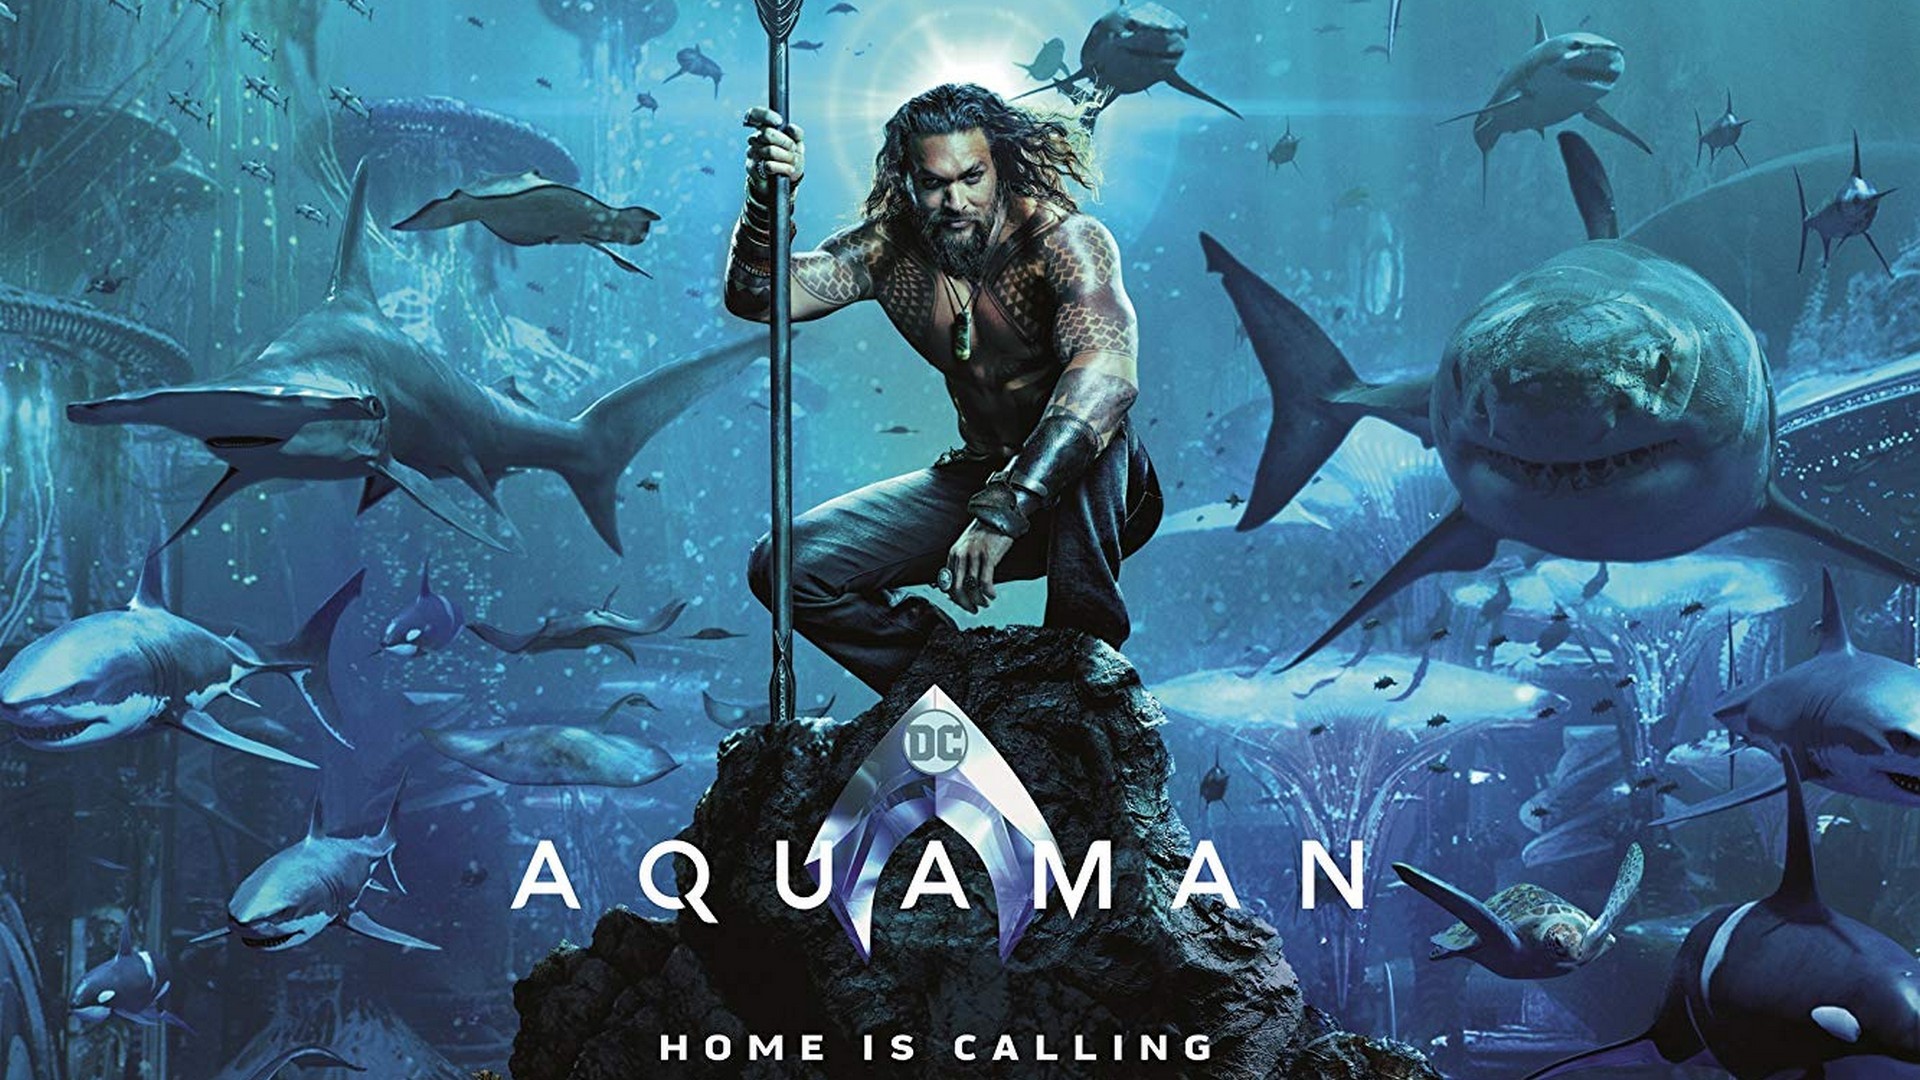 1920x1080 Aquaman 2018 Trailer Wallpaper with resolution  pixel. You can  make this wallpaper for your